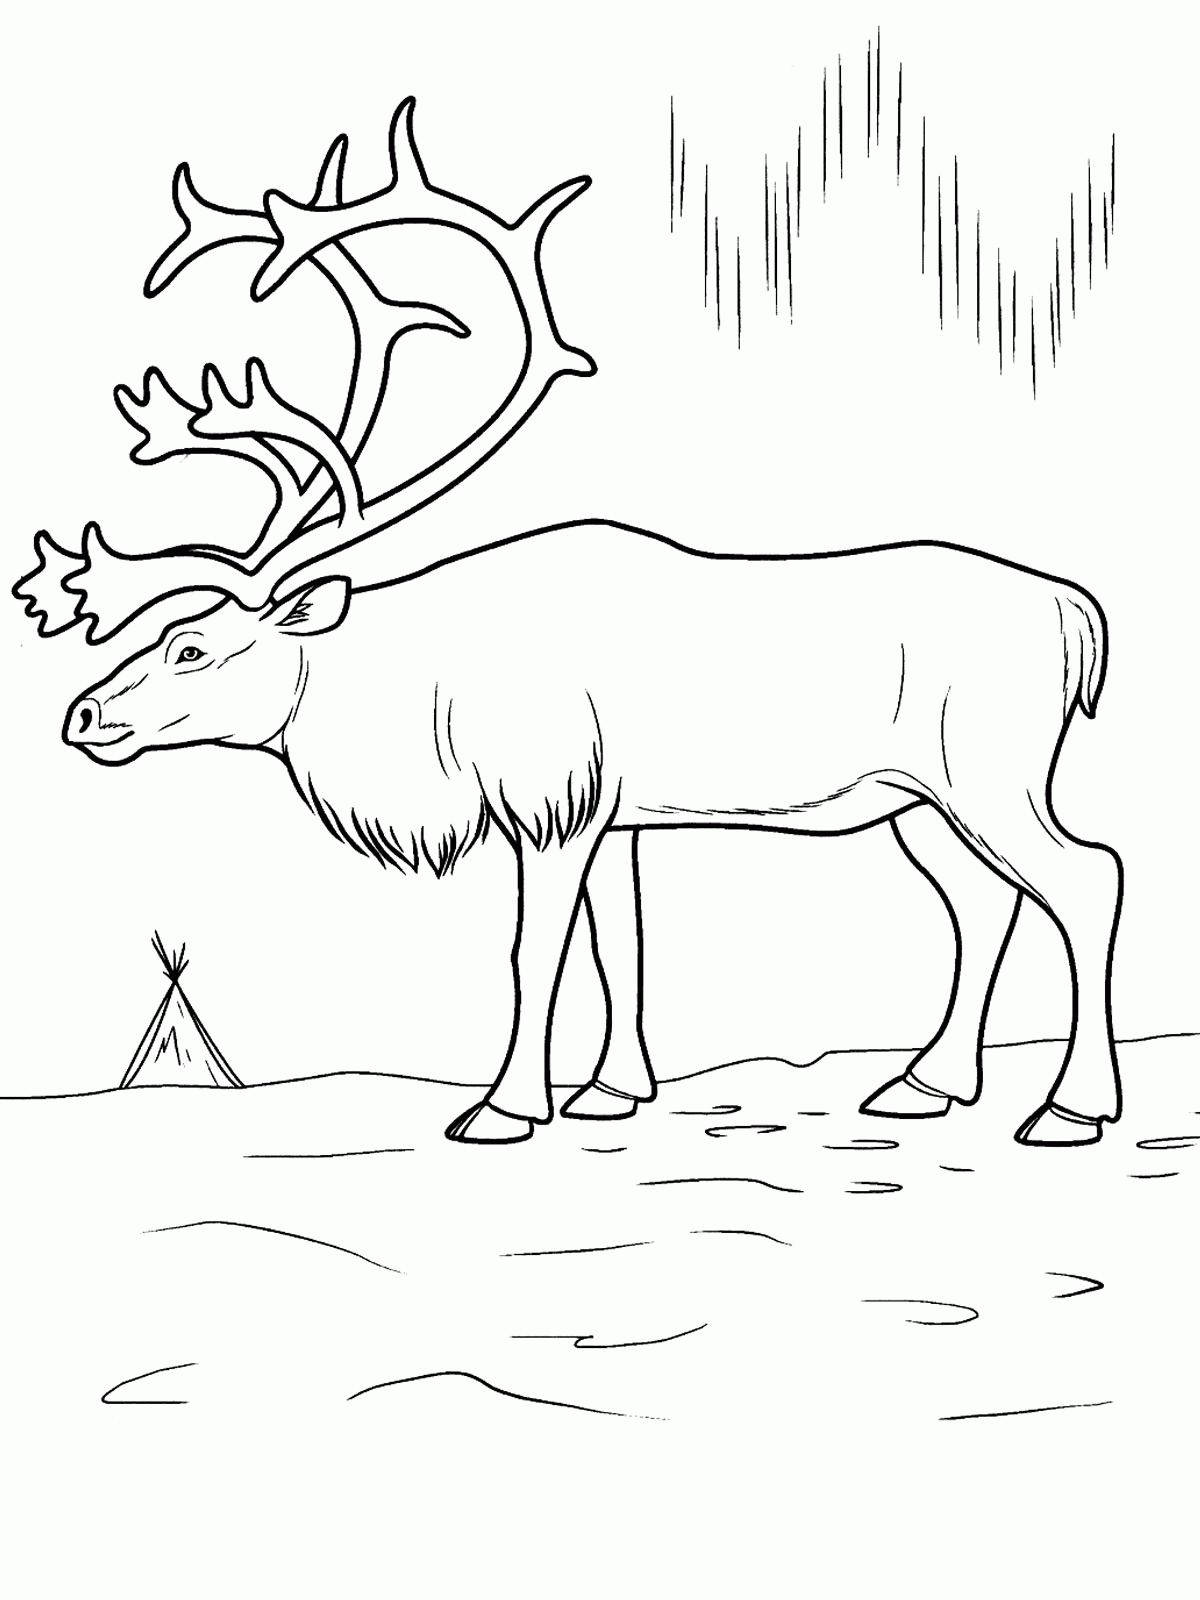 outline-arctic-animals-set-for-coloring-page-vector-image